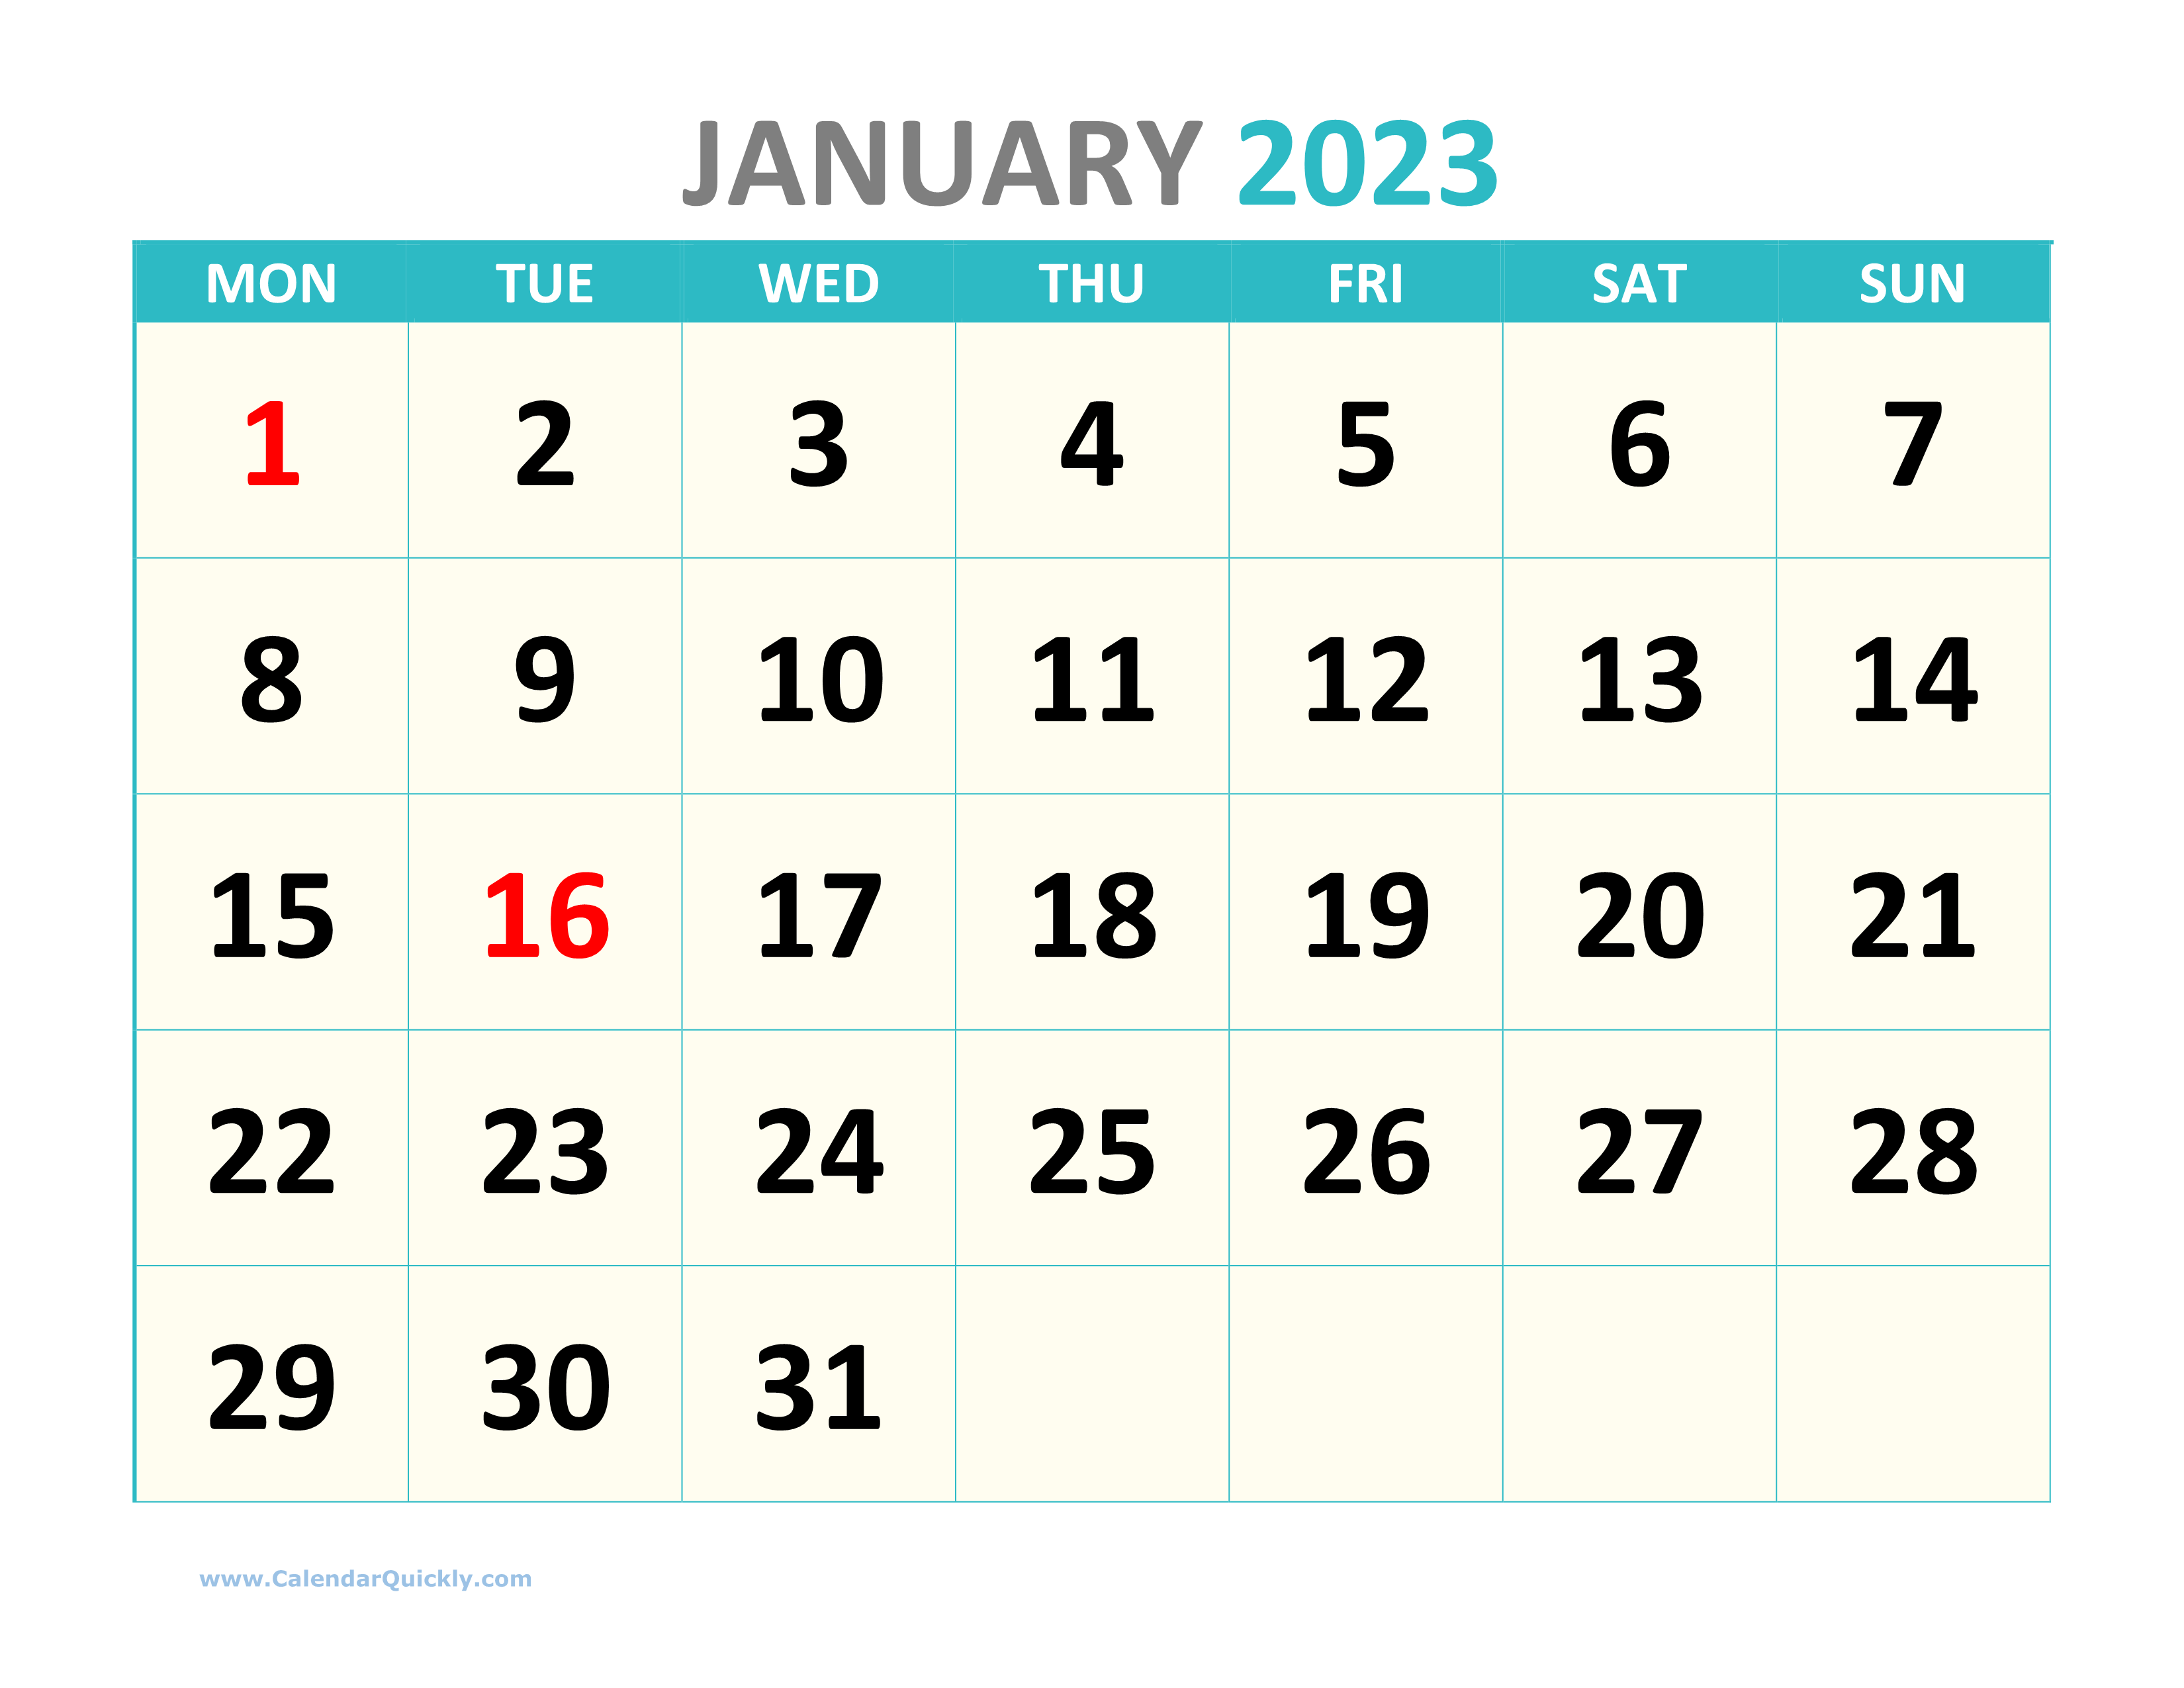 calendar-for-2023-year-week-starts-on-monday-vector-image-large